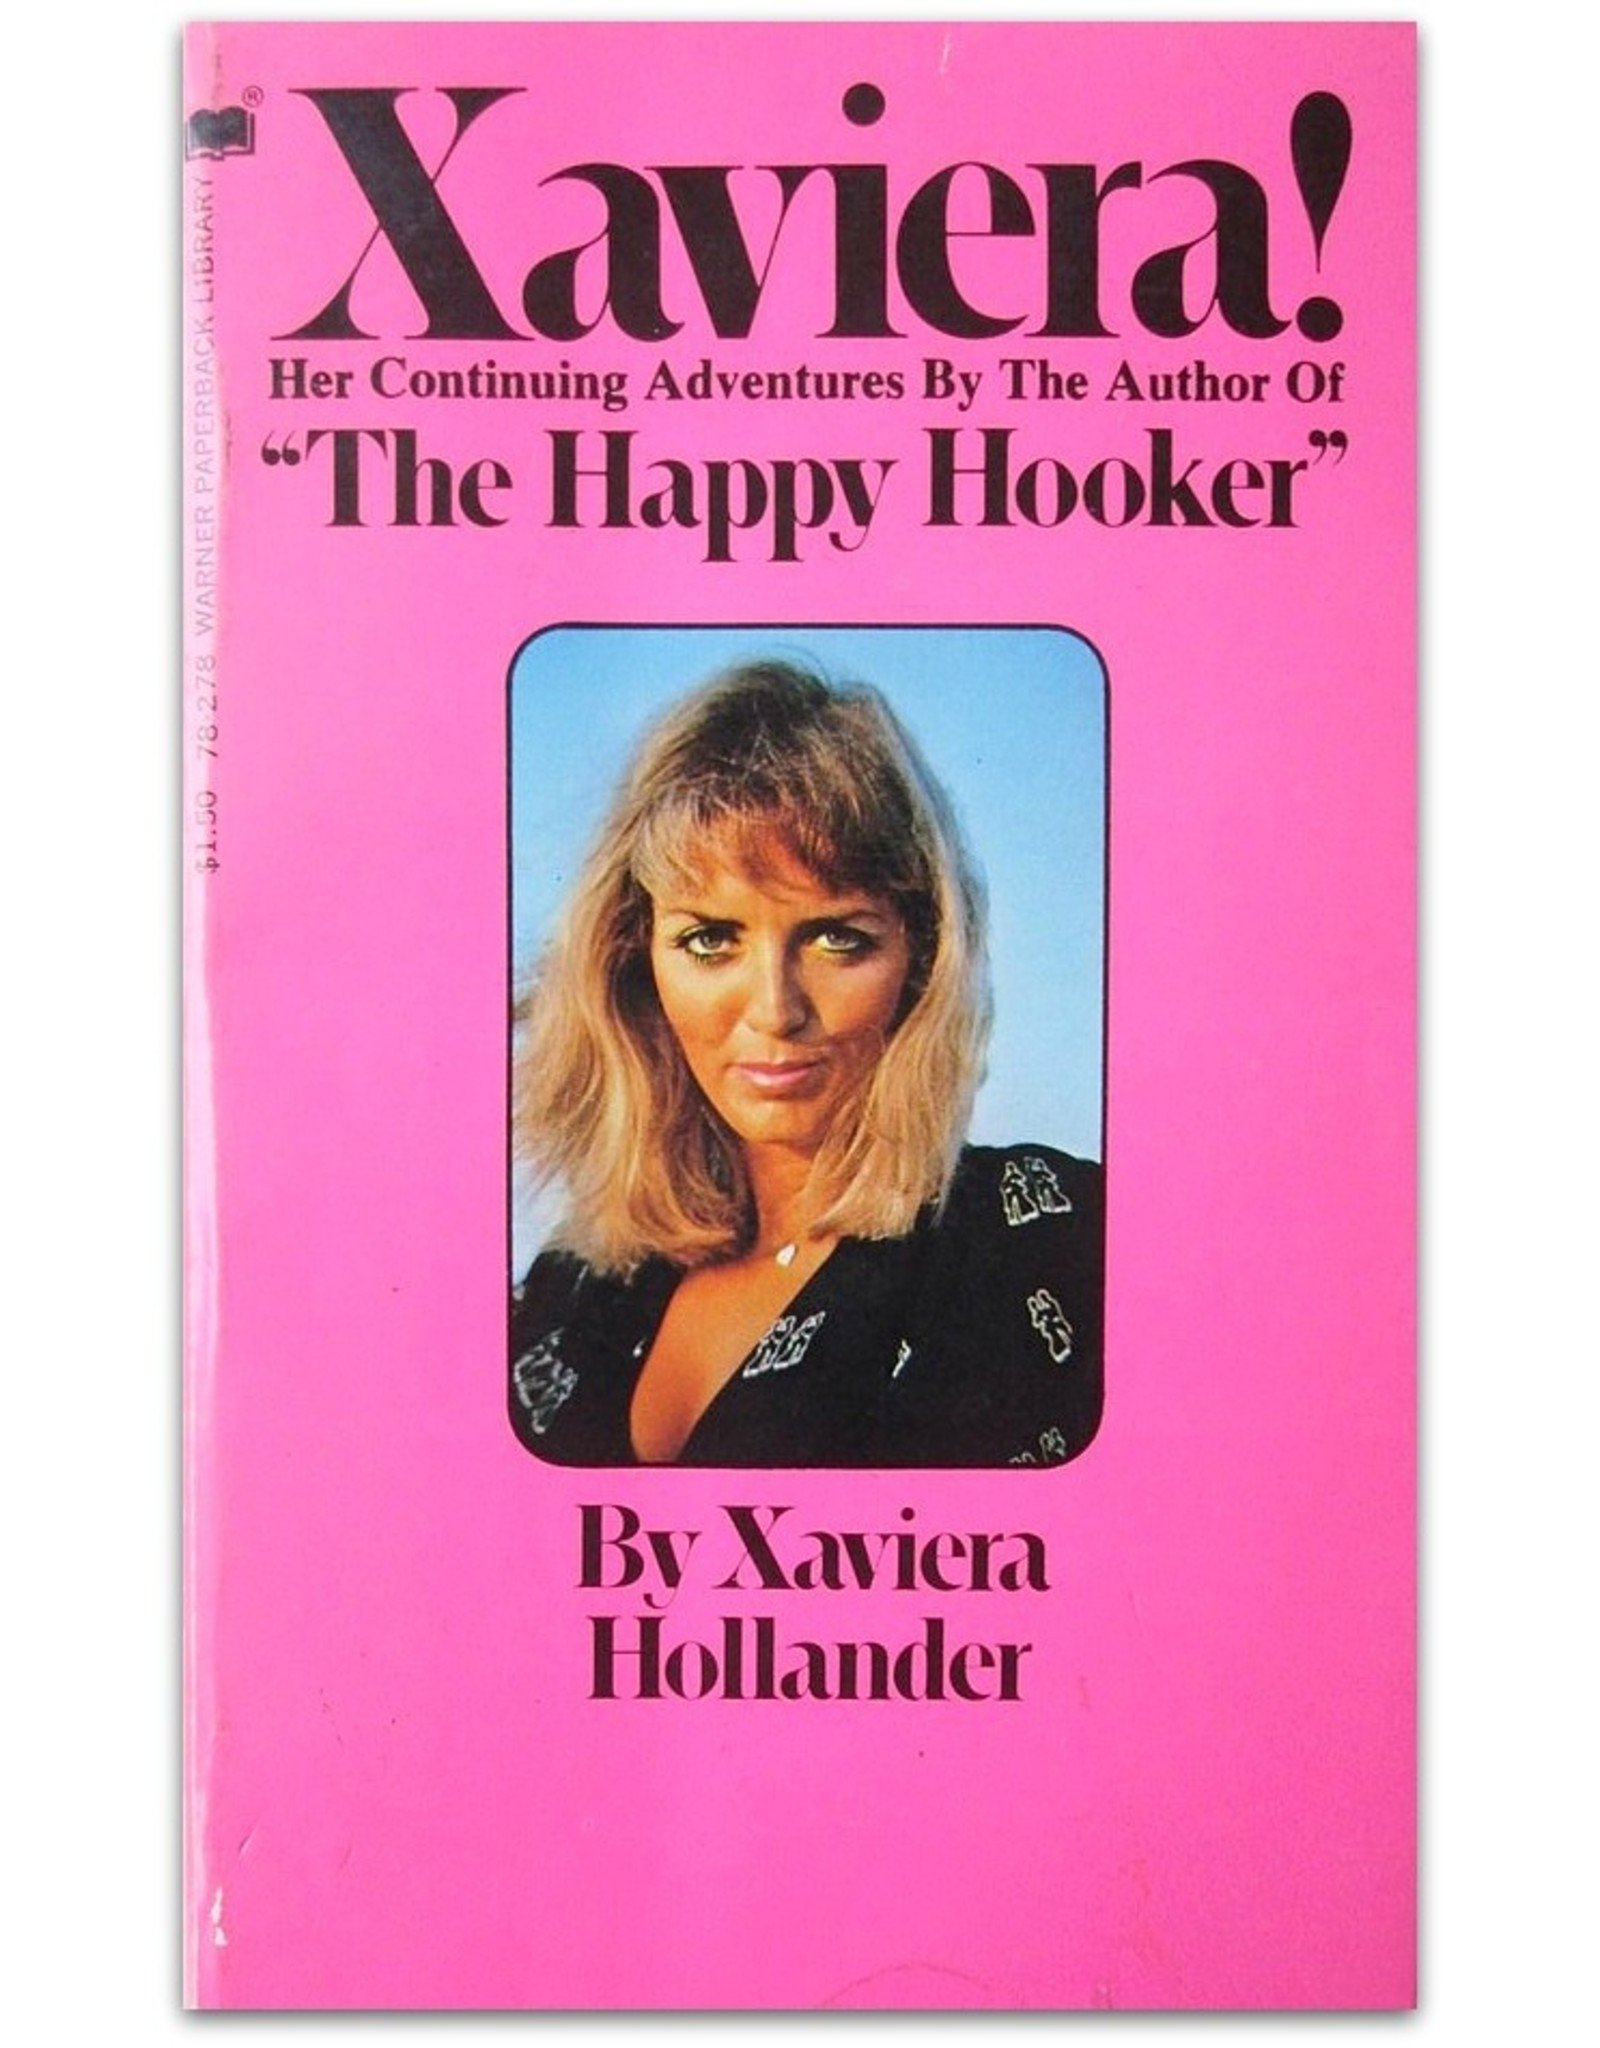 Xaviera Hollander - Xaviera! Her Continuing Adventures. By The Author Of "The Happy Hooker"